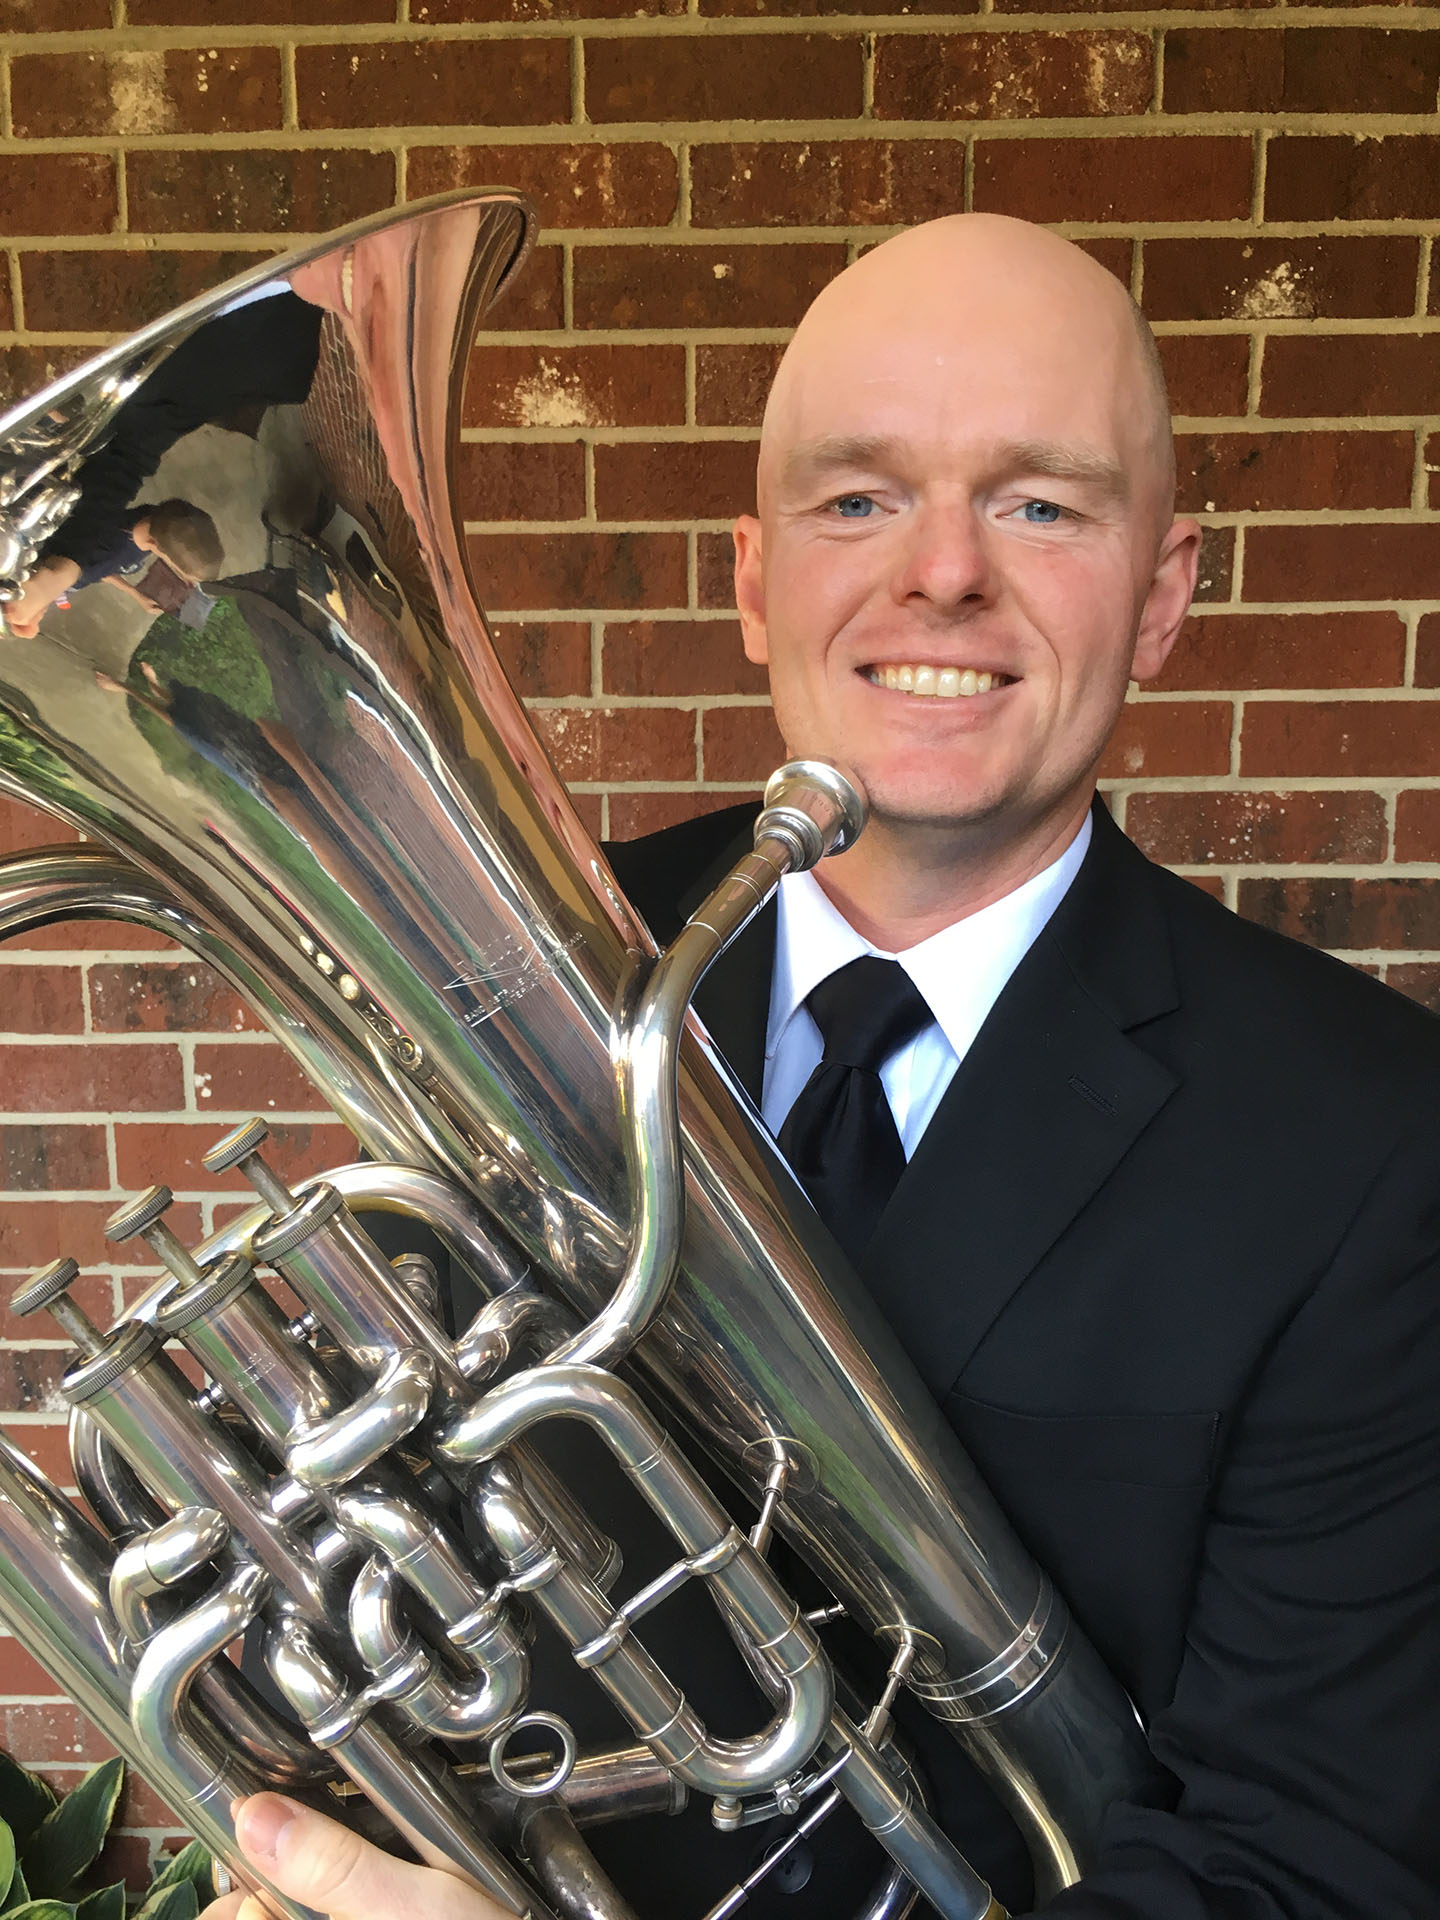 Guest euphonium masterclass with military musician